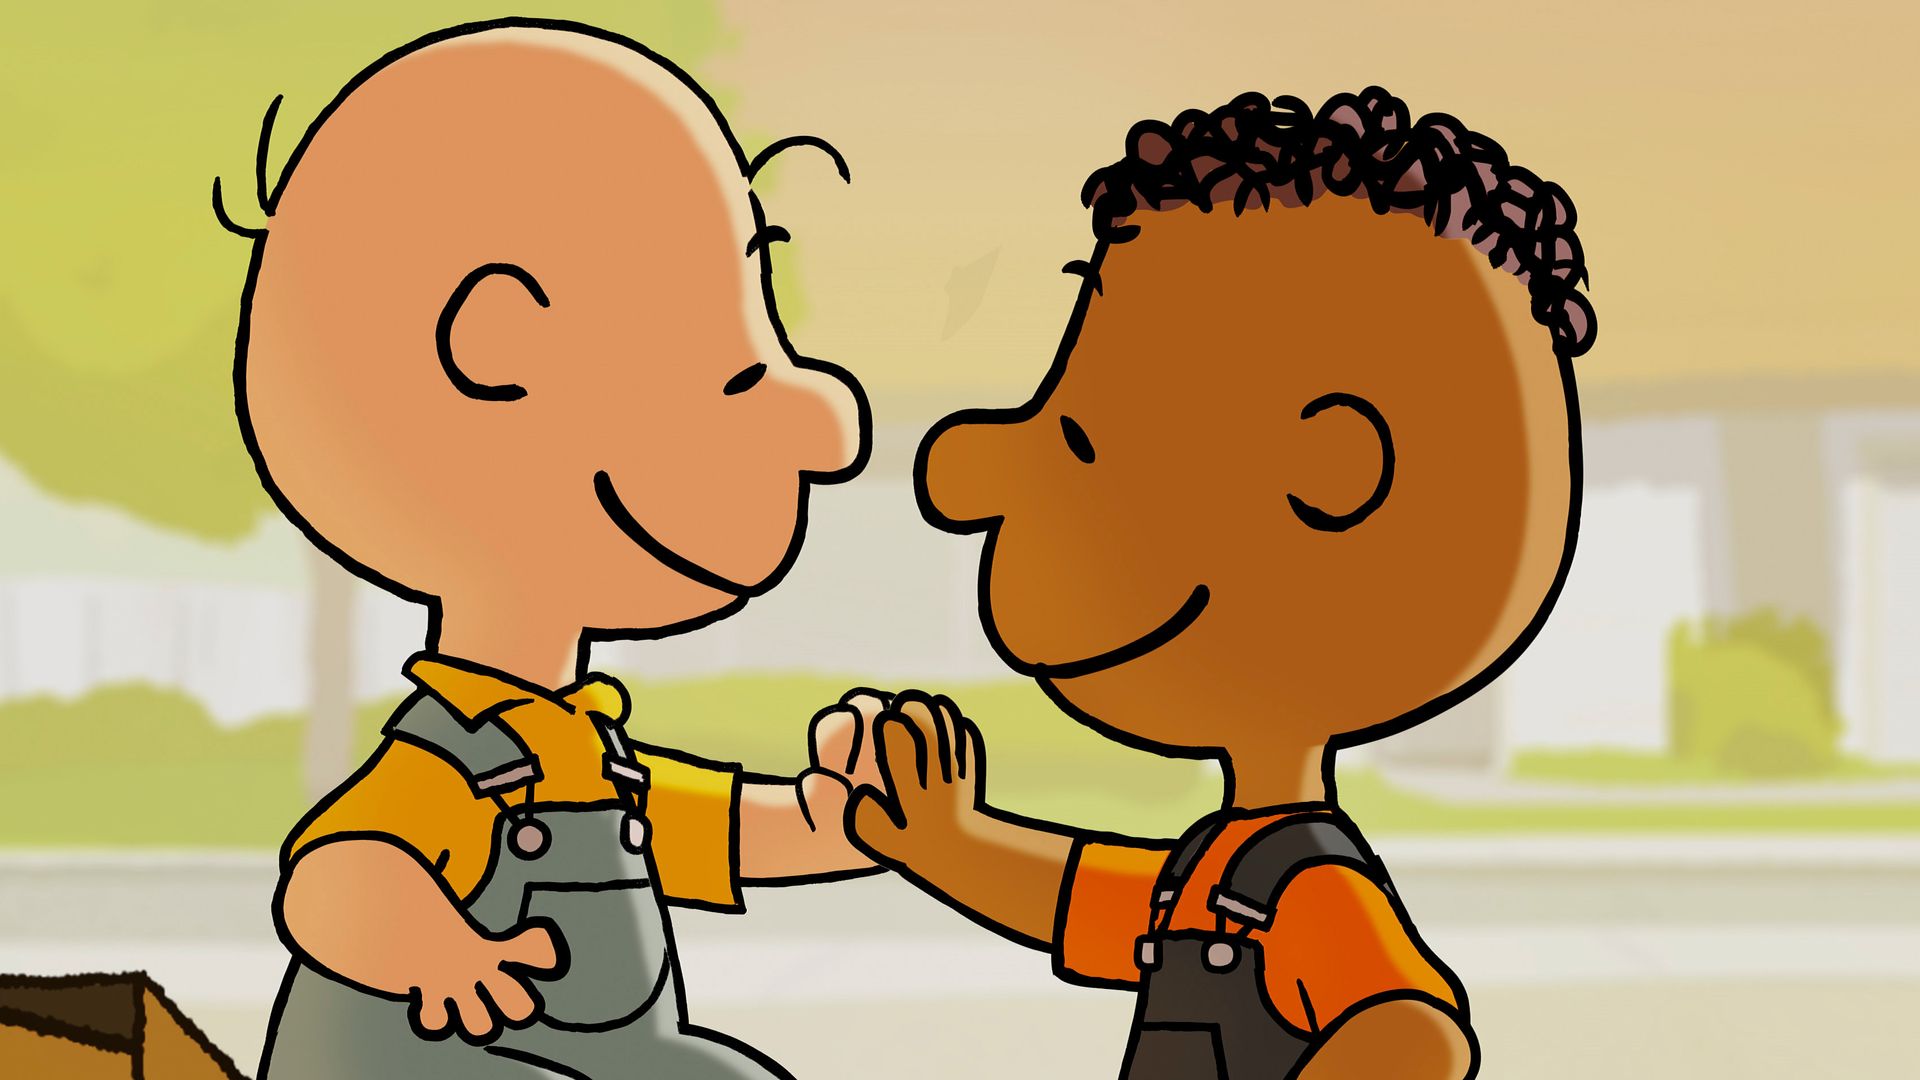 Charlie Brown and Franklin Armstrong in "Snoopy Presents: Welcome Home, Franklin," premiering Friday on Apple TV+.